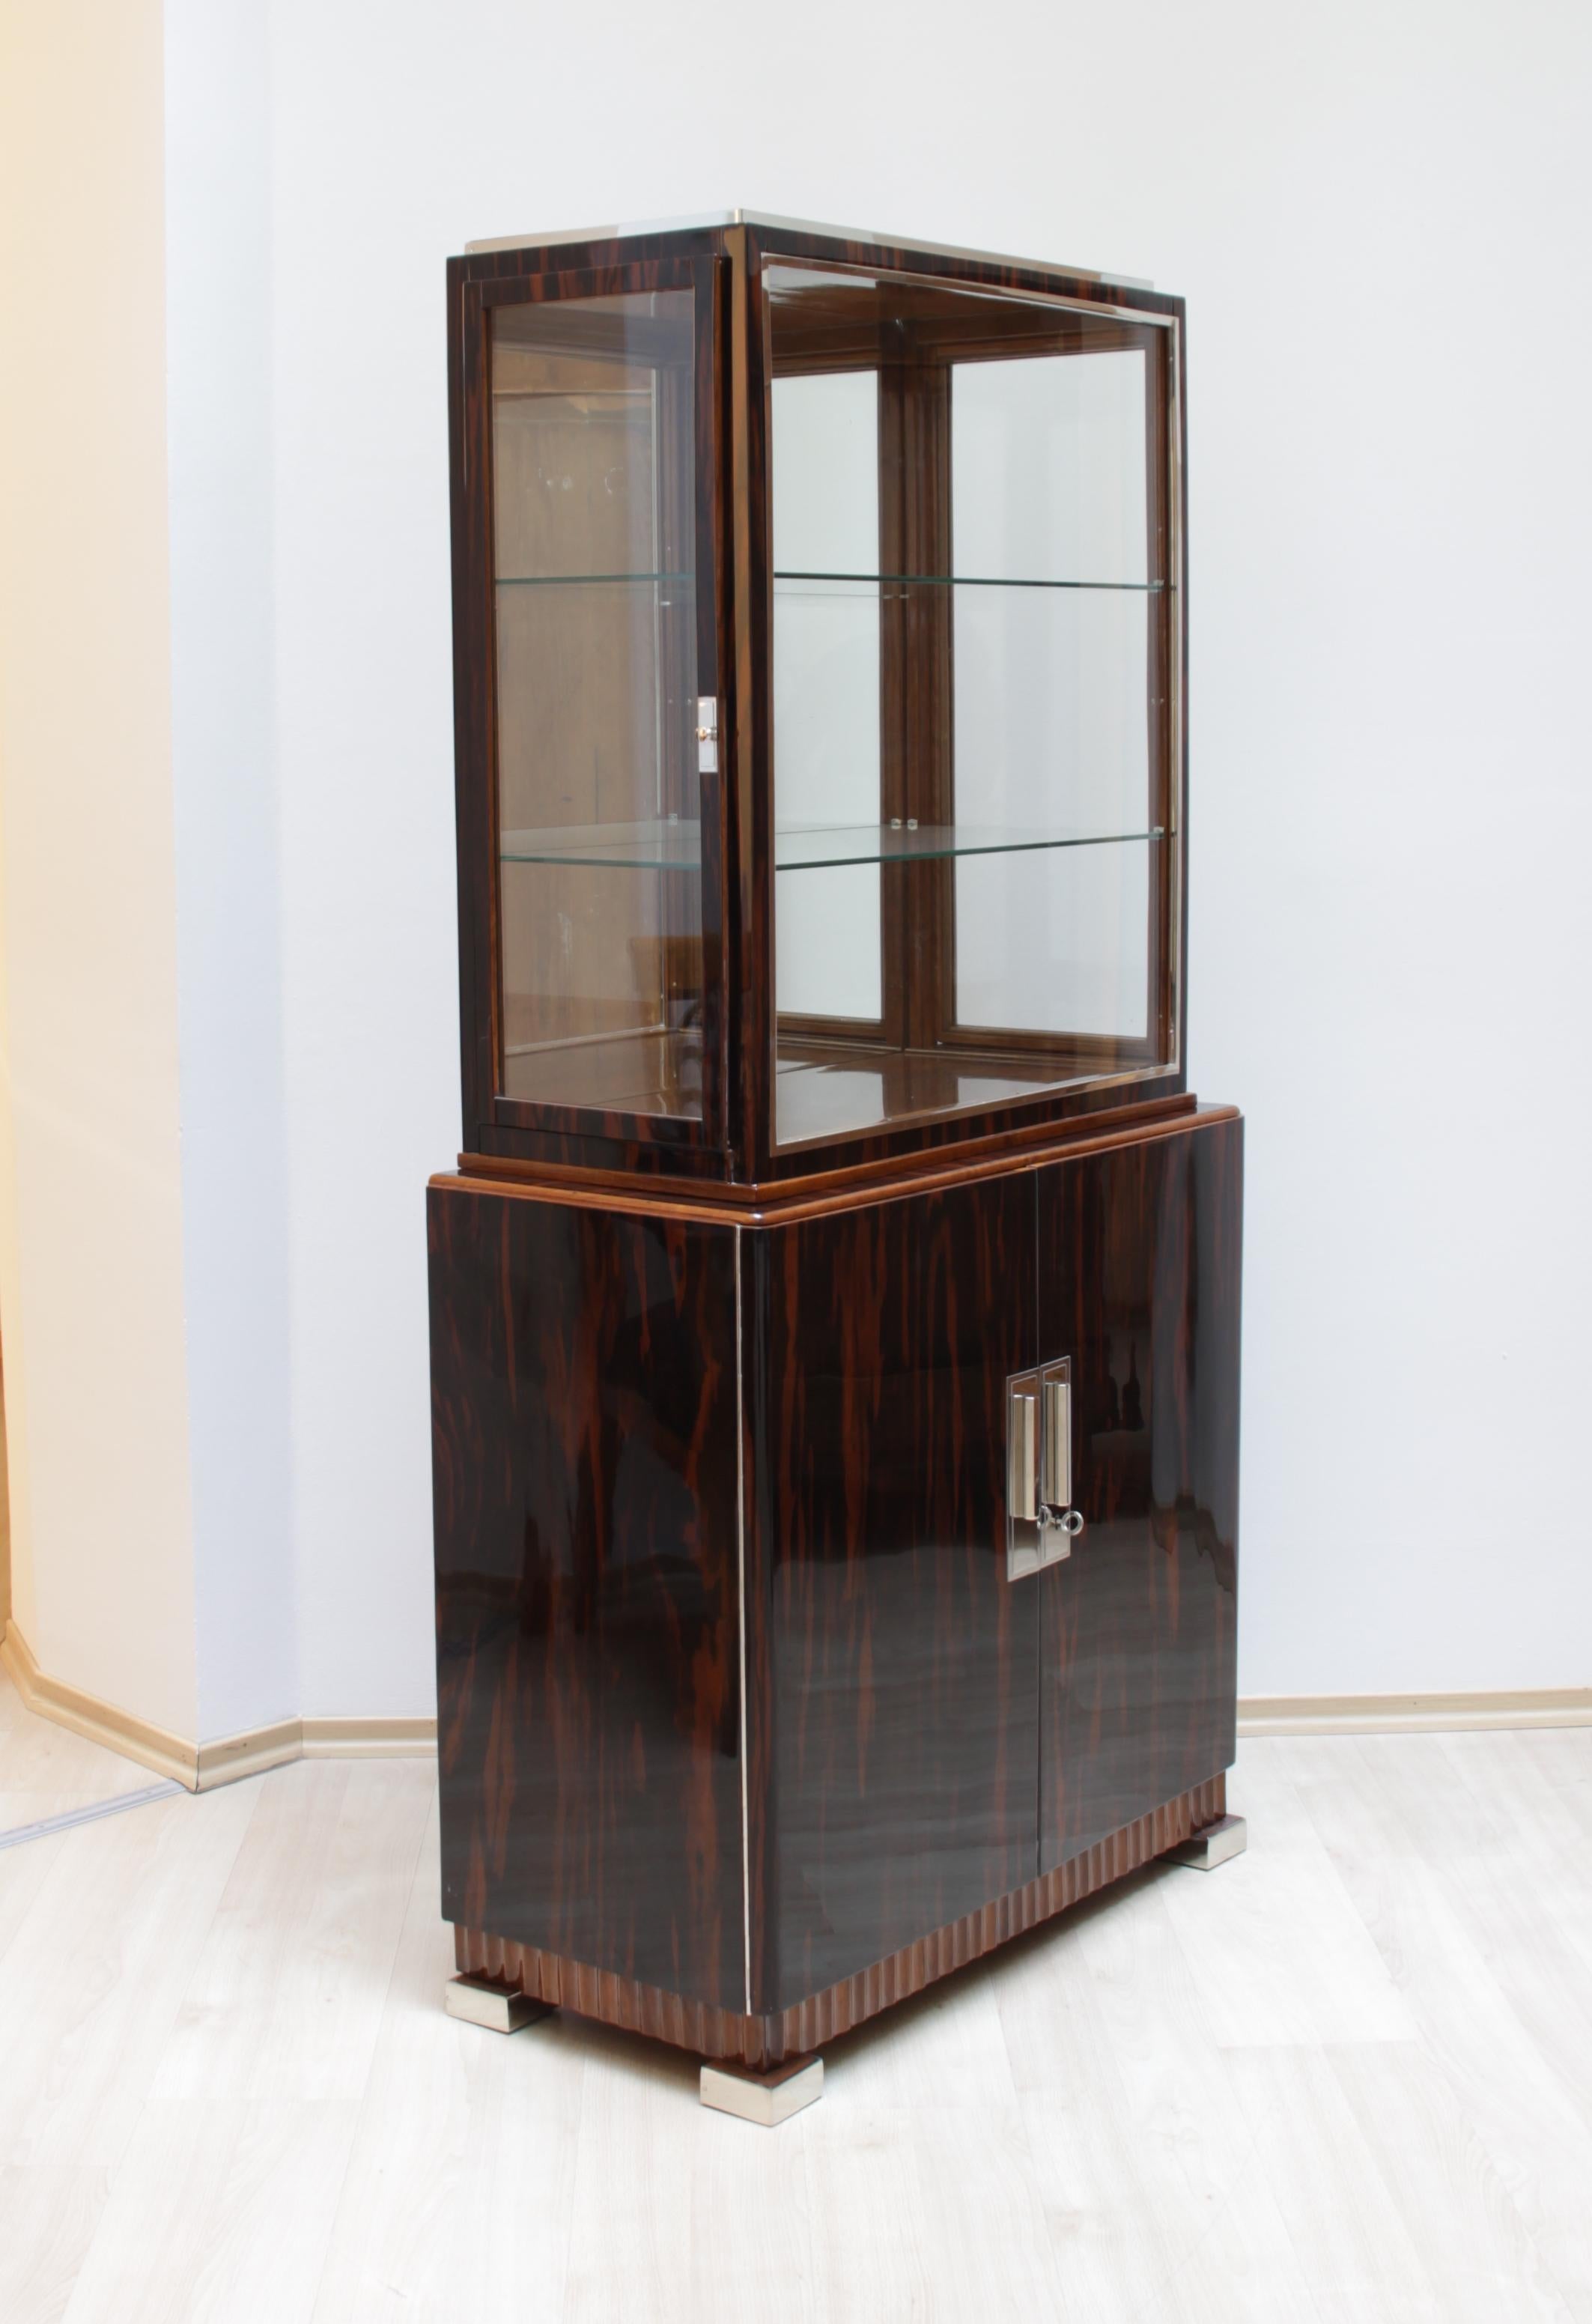 Very elegant and rare Art Deco Vitrine / Showcase in Macassar Veneer from France around 1925.

Glassed on three sides. Both sides can be opened, while the front glass remains. 

Amazing Macassar veneer on the outside. The inside of the door is